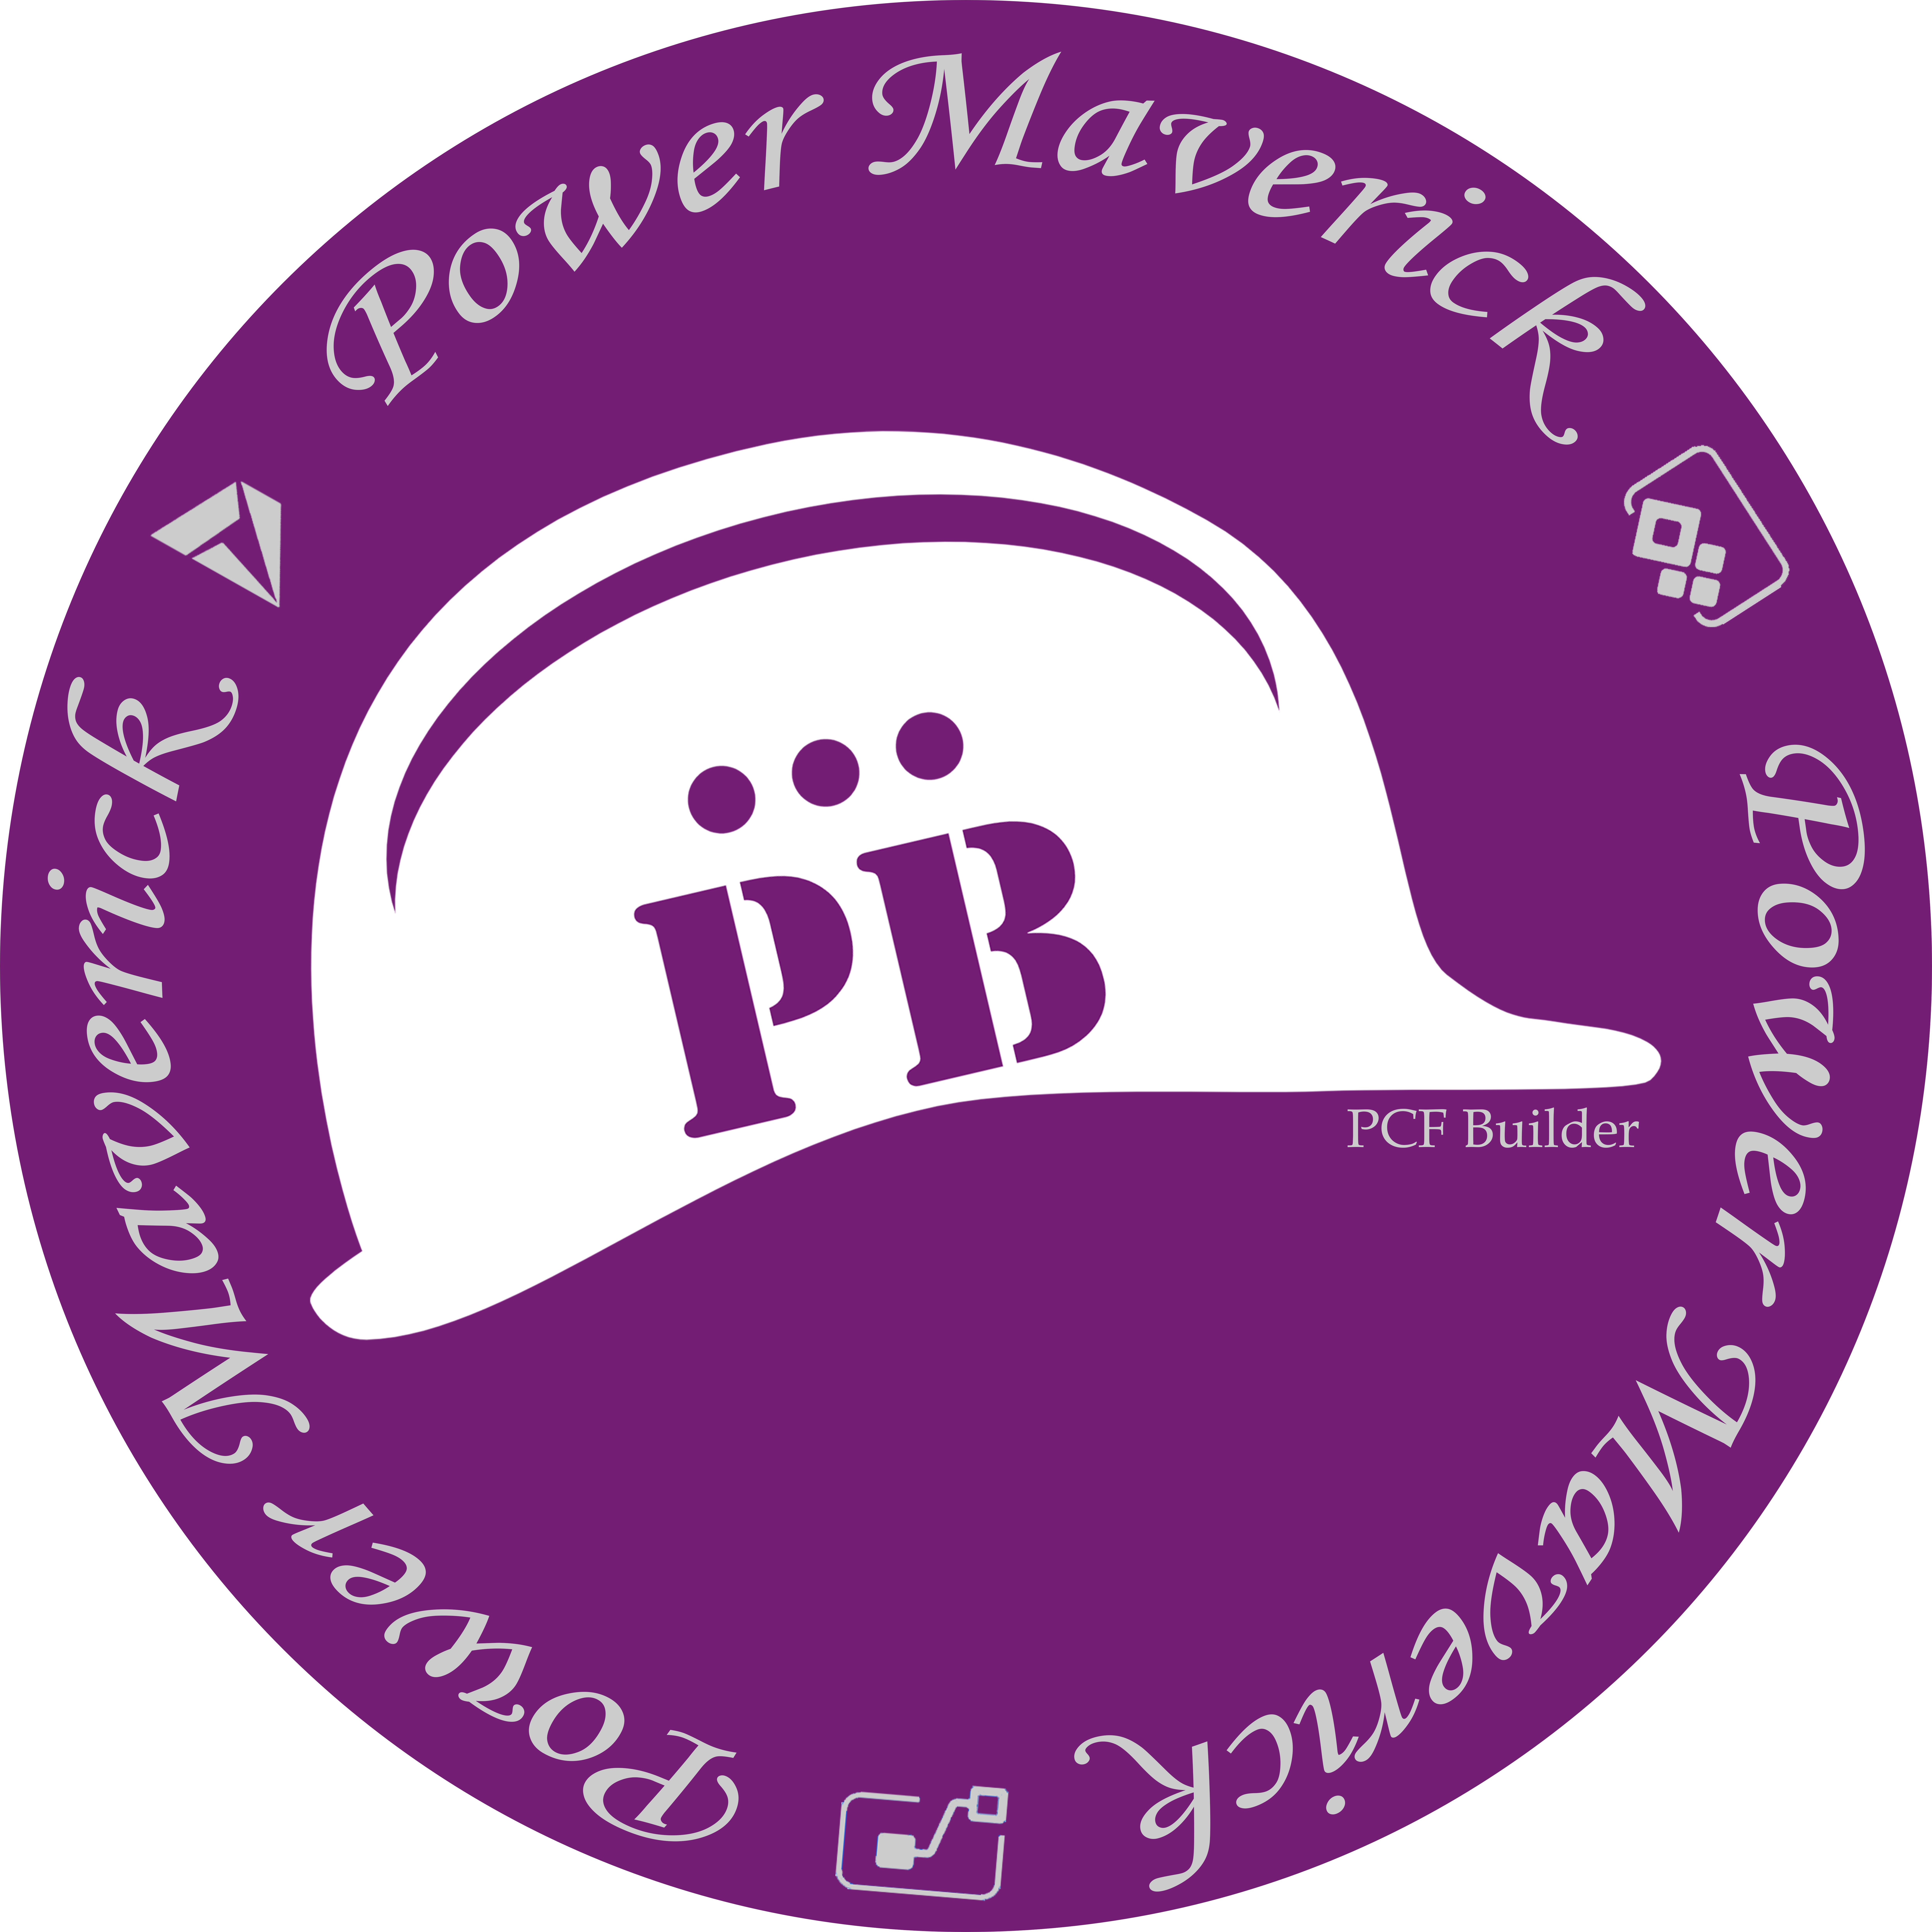 PCF Builder